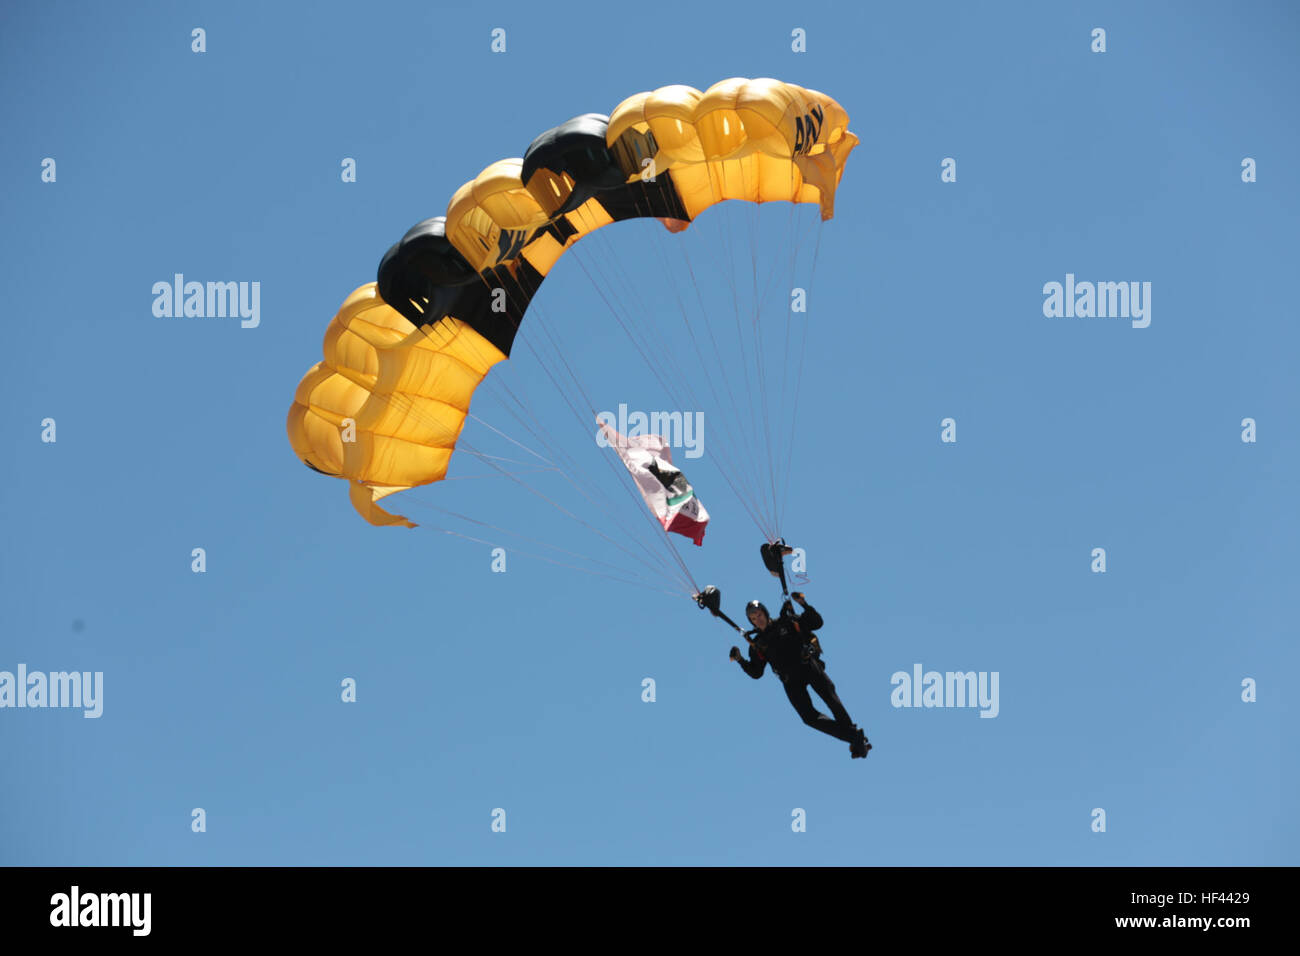 A U.S. Army soldier from the Golden Knights Parachute Team, free falls during the 2016 Marine Corps Air Station (MCAS) Miramar Air Show at MCAS Miramar, Calif., Sept. 24, 2016. The MCAS Miramar Air Show honors 100 years of the Marine Corps Reserves by showcasing aerial prowess of the Armed Forces and their appreciation of civilian community’s support to the troops. (U.S. Marine Corps photo by Pfc. Nadia J. Stark/Not Released) 2016 MCAS Miramar Air Show 160924-M-BV291-176 Stock Photo